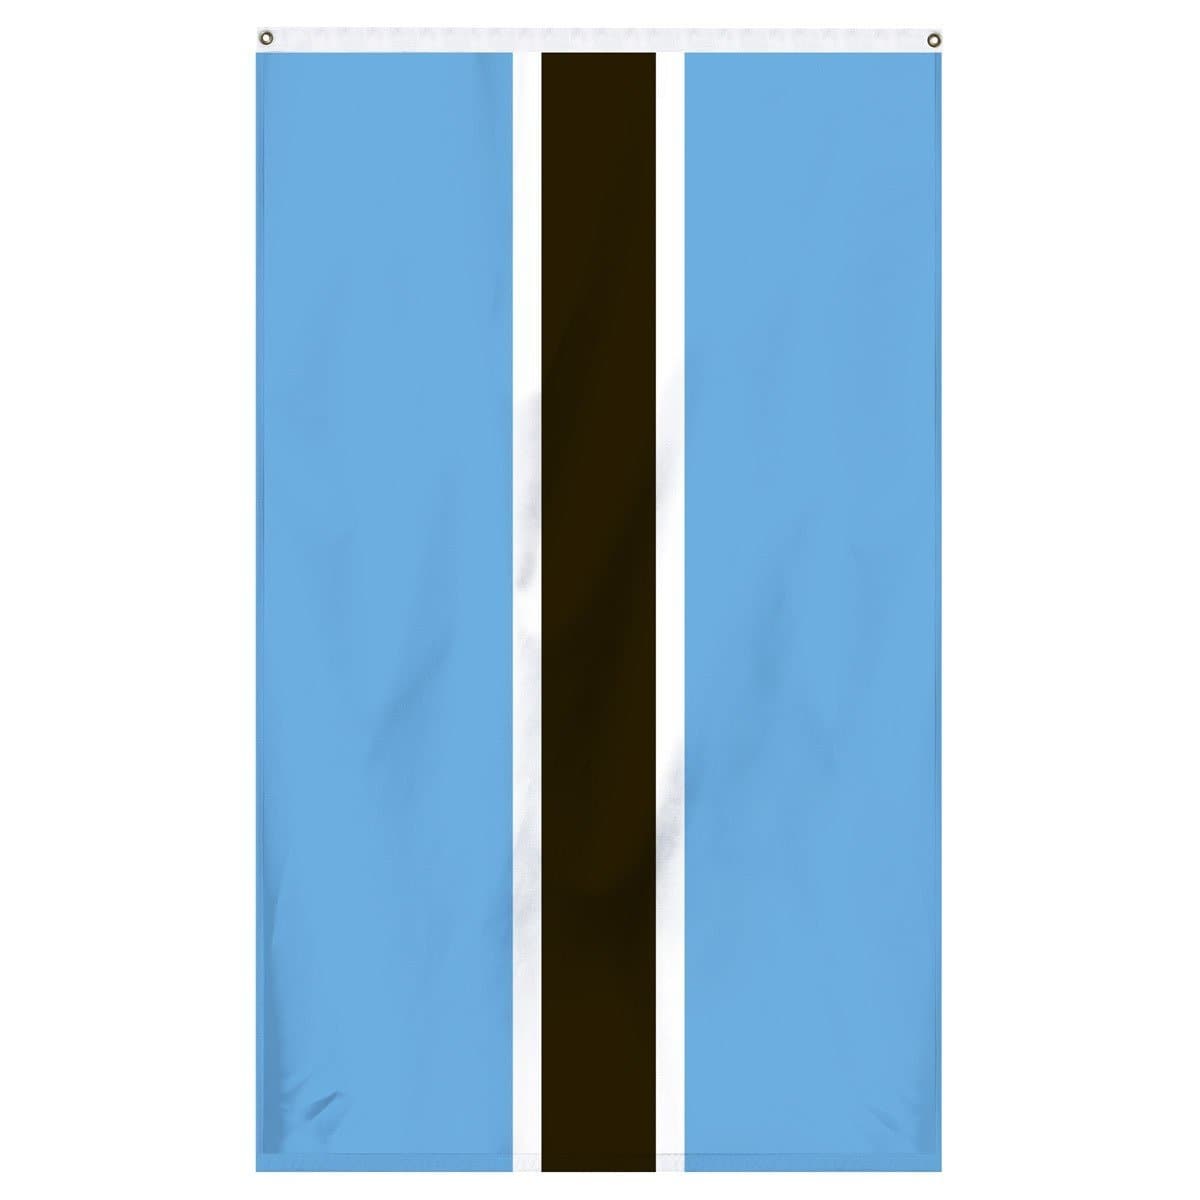 The national flag of Botswana for sale for flagpoles and parades